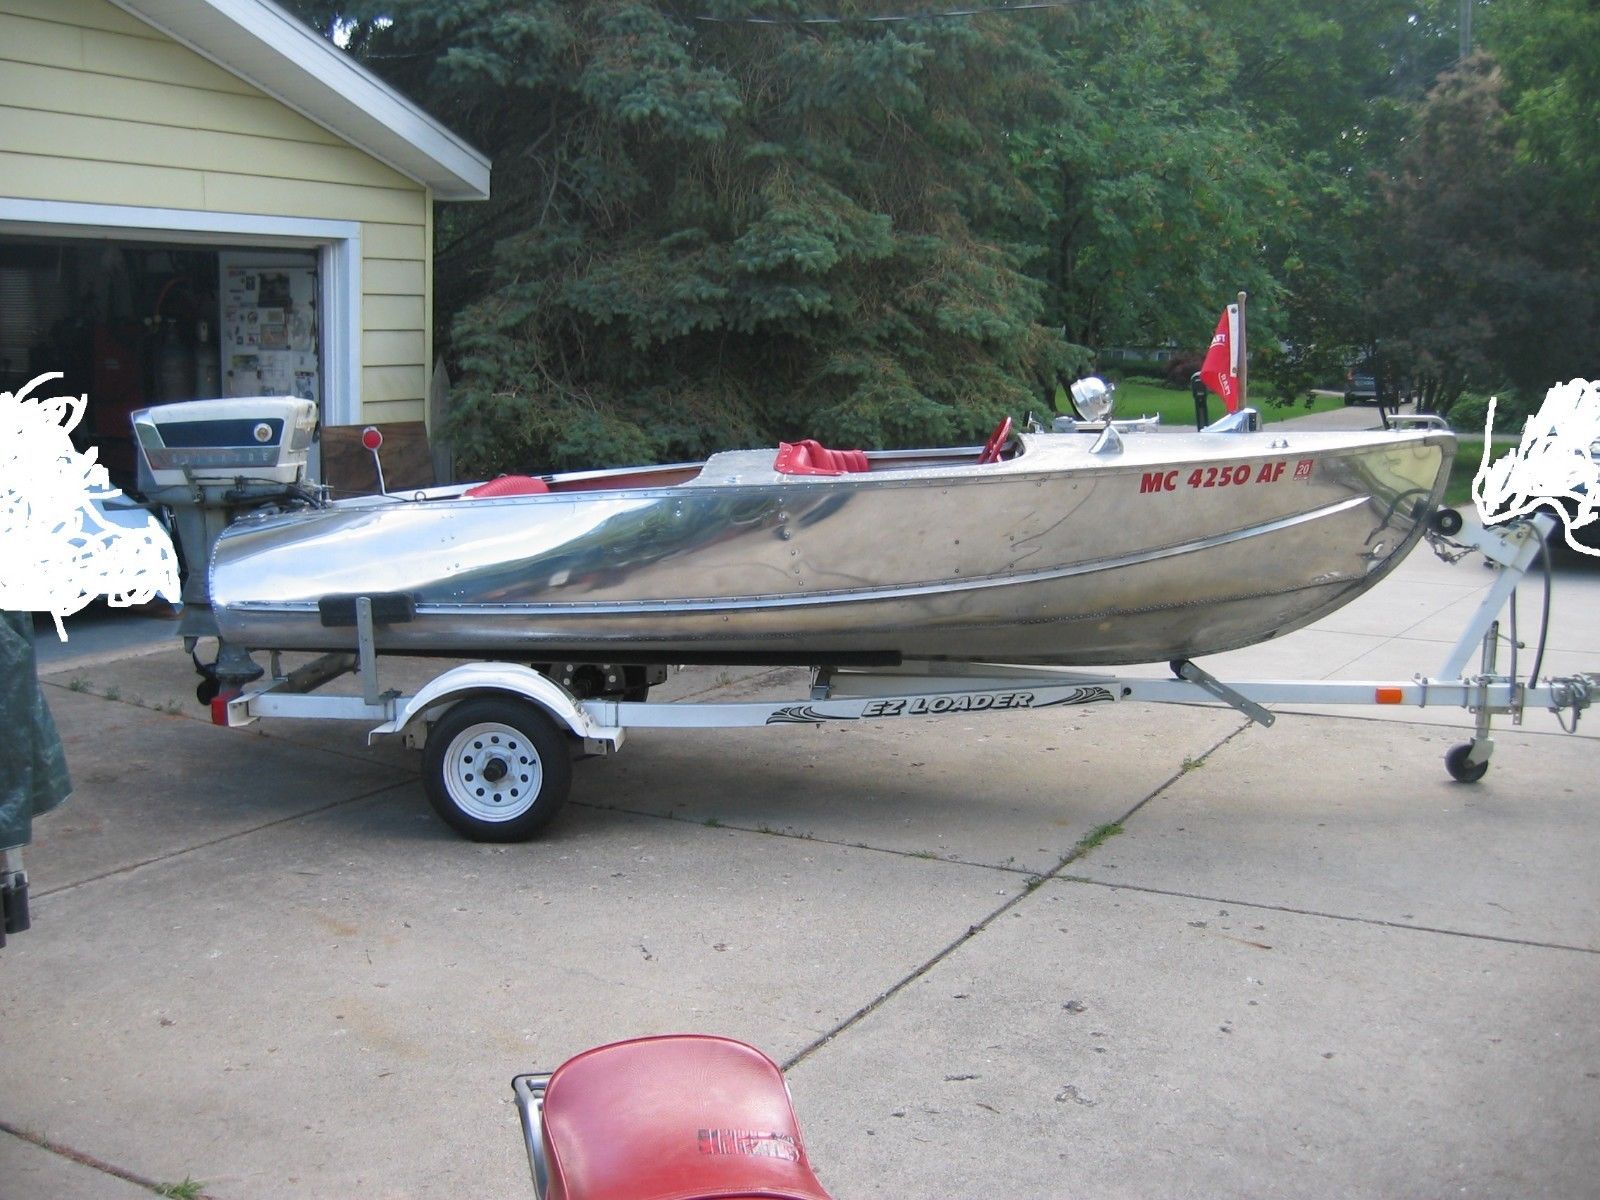 Feathercraft 1956 for sale $5,800 - Boats-from-USA.com